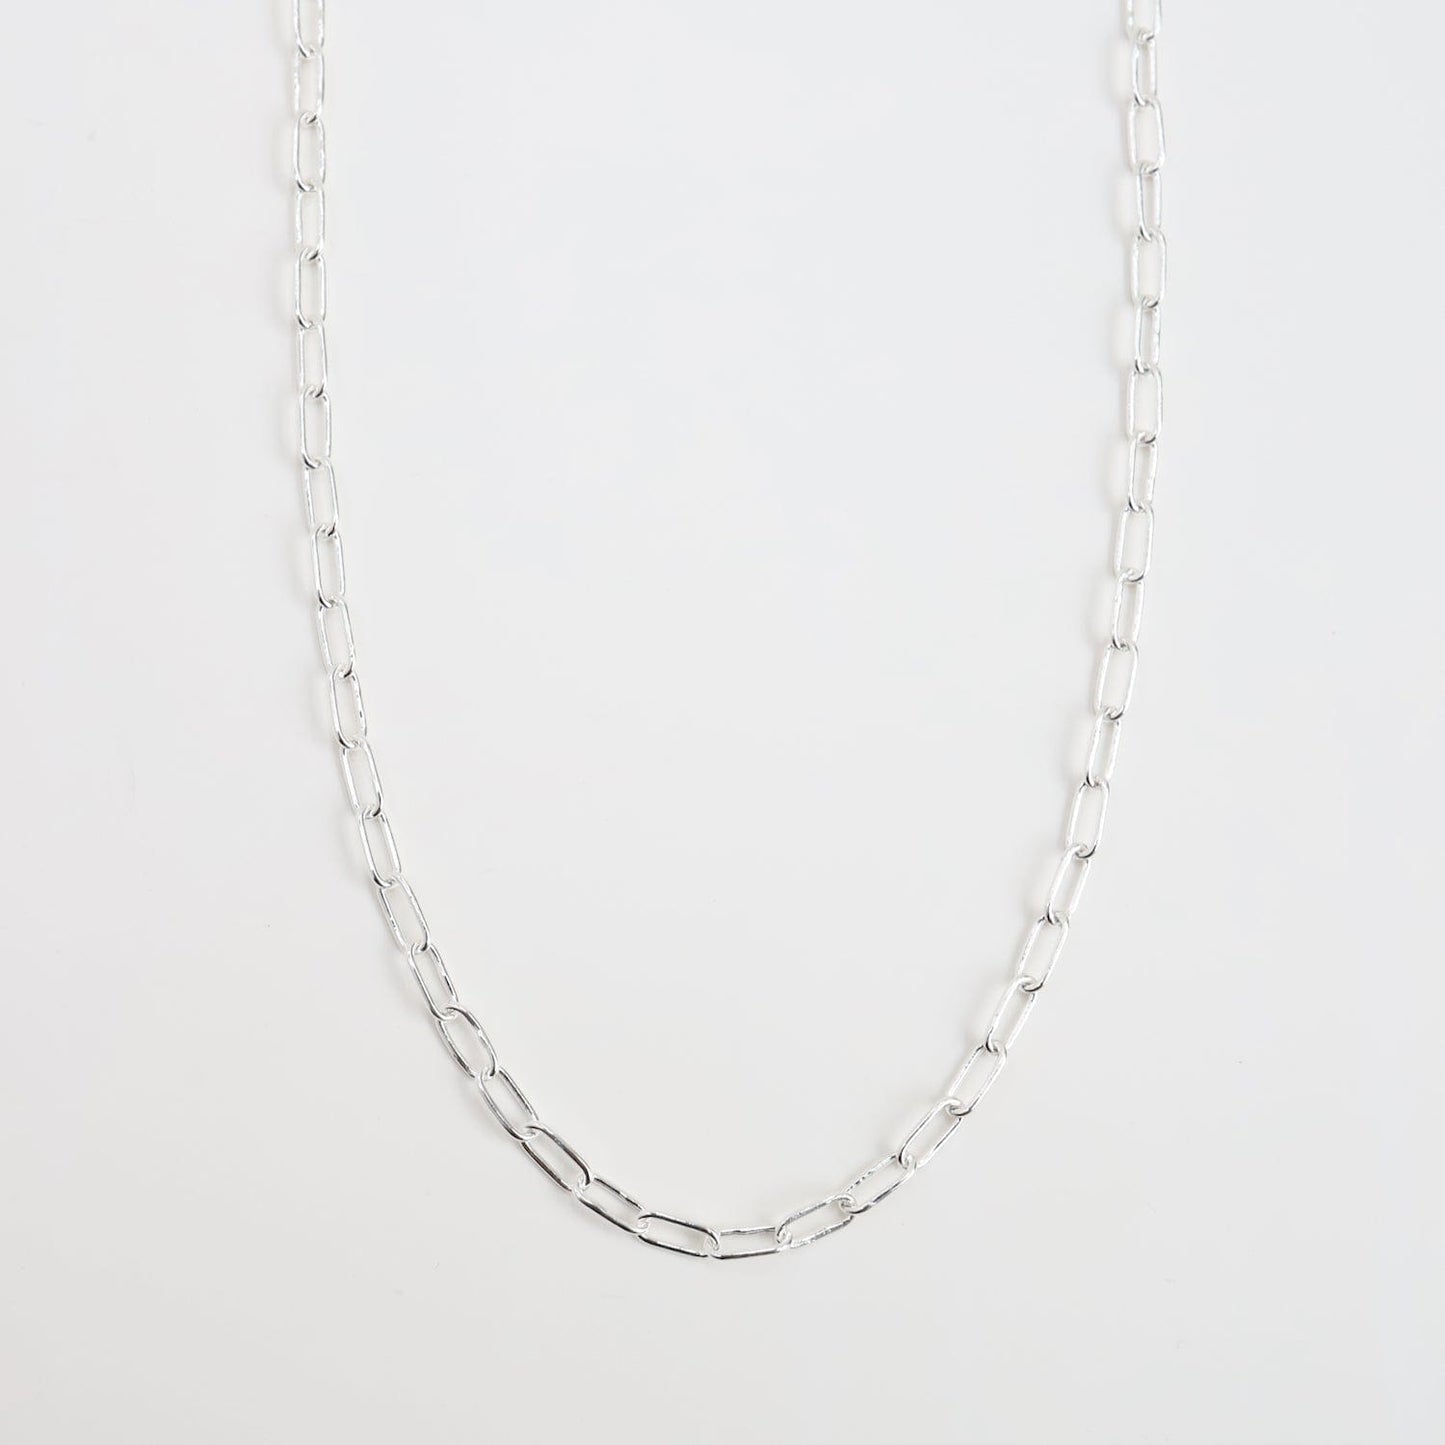 CHN 20" 2.6mm Sterling Silver Link Chain